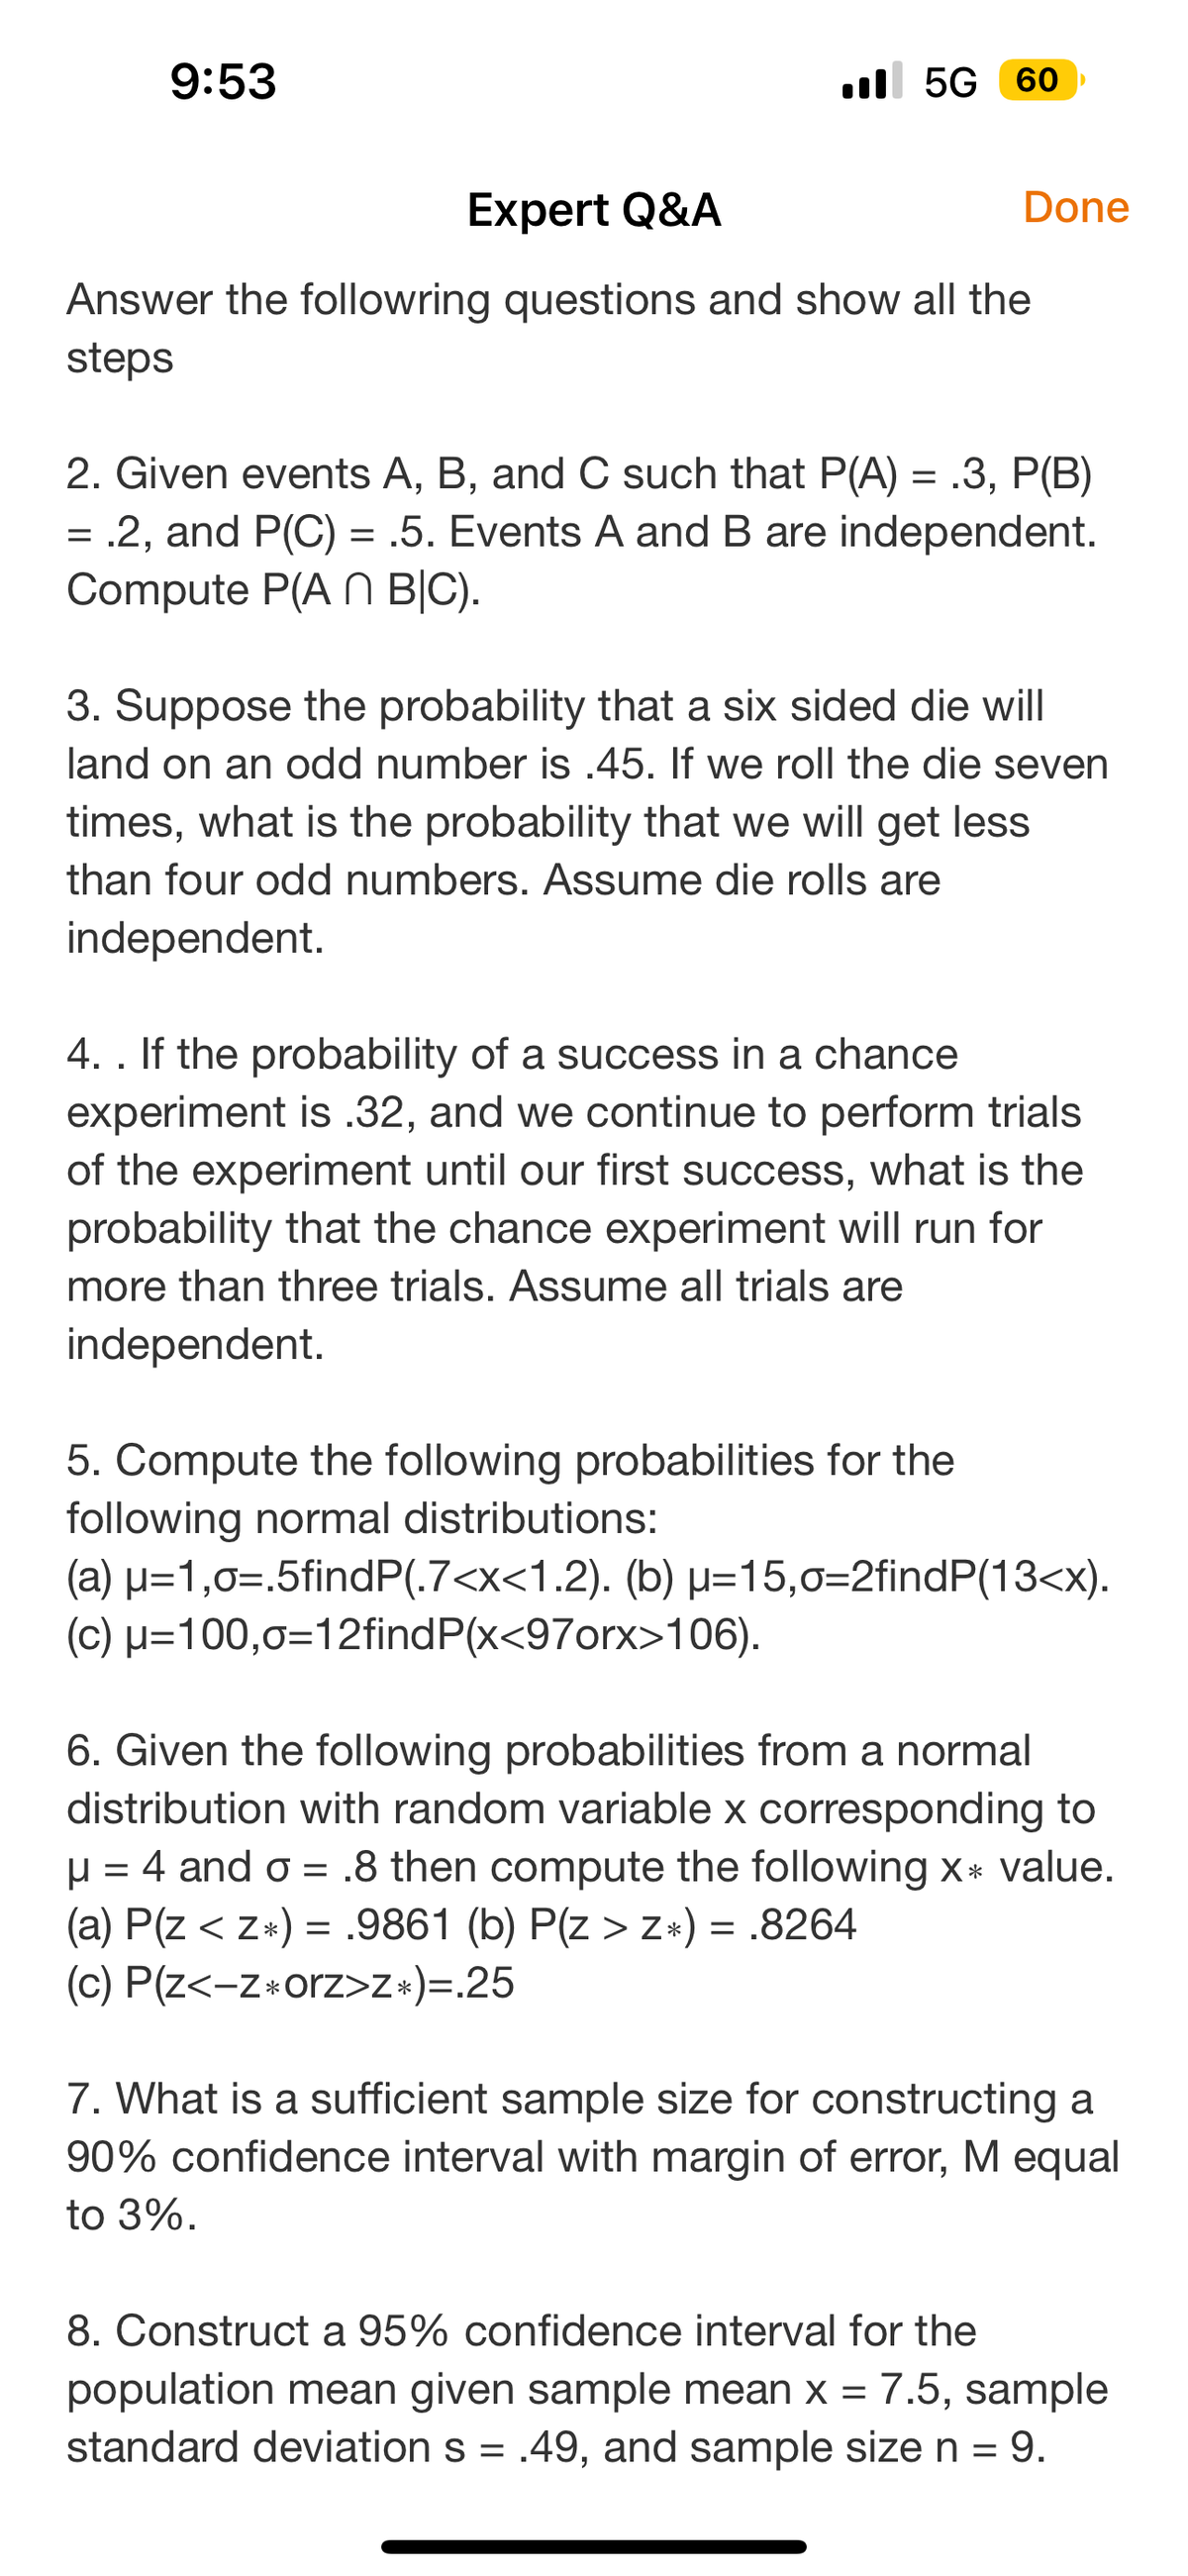 9:53
5G 60
Expert Q&A
Answer the followring questions and show all the
steps
Done
2. Given events A, B, and C such that P(A) = .3, P(B)
= .2, and P(C) = .5. Events A and B are independent.
Compute P(An B|C).
3. Suppose the probability that a six sided die will
land on an odd number is .45. If we roll the die seven
times, what is the probability that we will get less
than four odd numbers. Assume die rolls are
independent.
4. . If the probability of a success in a chance
experiment is .32, and we continue to perform trials
of the experiment until our first success, what is the
probability that the chance experiment will run for
more than three trials. Assume all trials are
independent.
5. Compute the following probabilities for the
following normal distributions:
(a) μ=1,o=.5findP(.7<x<1.2). (b) u=15,0=2findP(13<x).
(c) μ=100,o=12find P(x<97orx>106).
6. Given the following probabilities from a normal
distribution with random variable x corresponding to
μ = 4 and o= .8 then compute the following x* value.
(a) P(Z < z*) = .9861 (b) P(z > z*) = .8264
(c) P(z<-z orz>z*)=.25
7. What is a sufficient sample size for constructing a
90% confidence interval with margin of error, M equal
to 3%.
8. Construct a 95% confidence interval for the
population mean given sample mean x = 7.5, sample
standard deviation s = .49, and sample size n = 9.